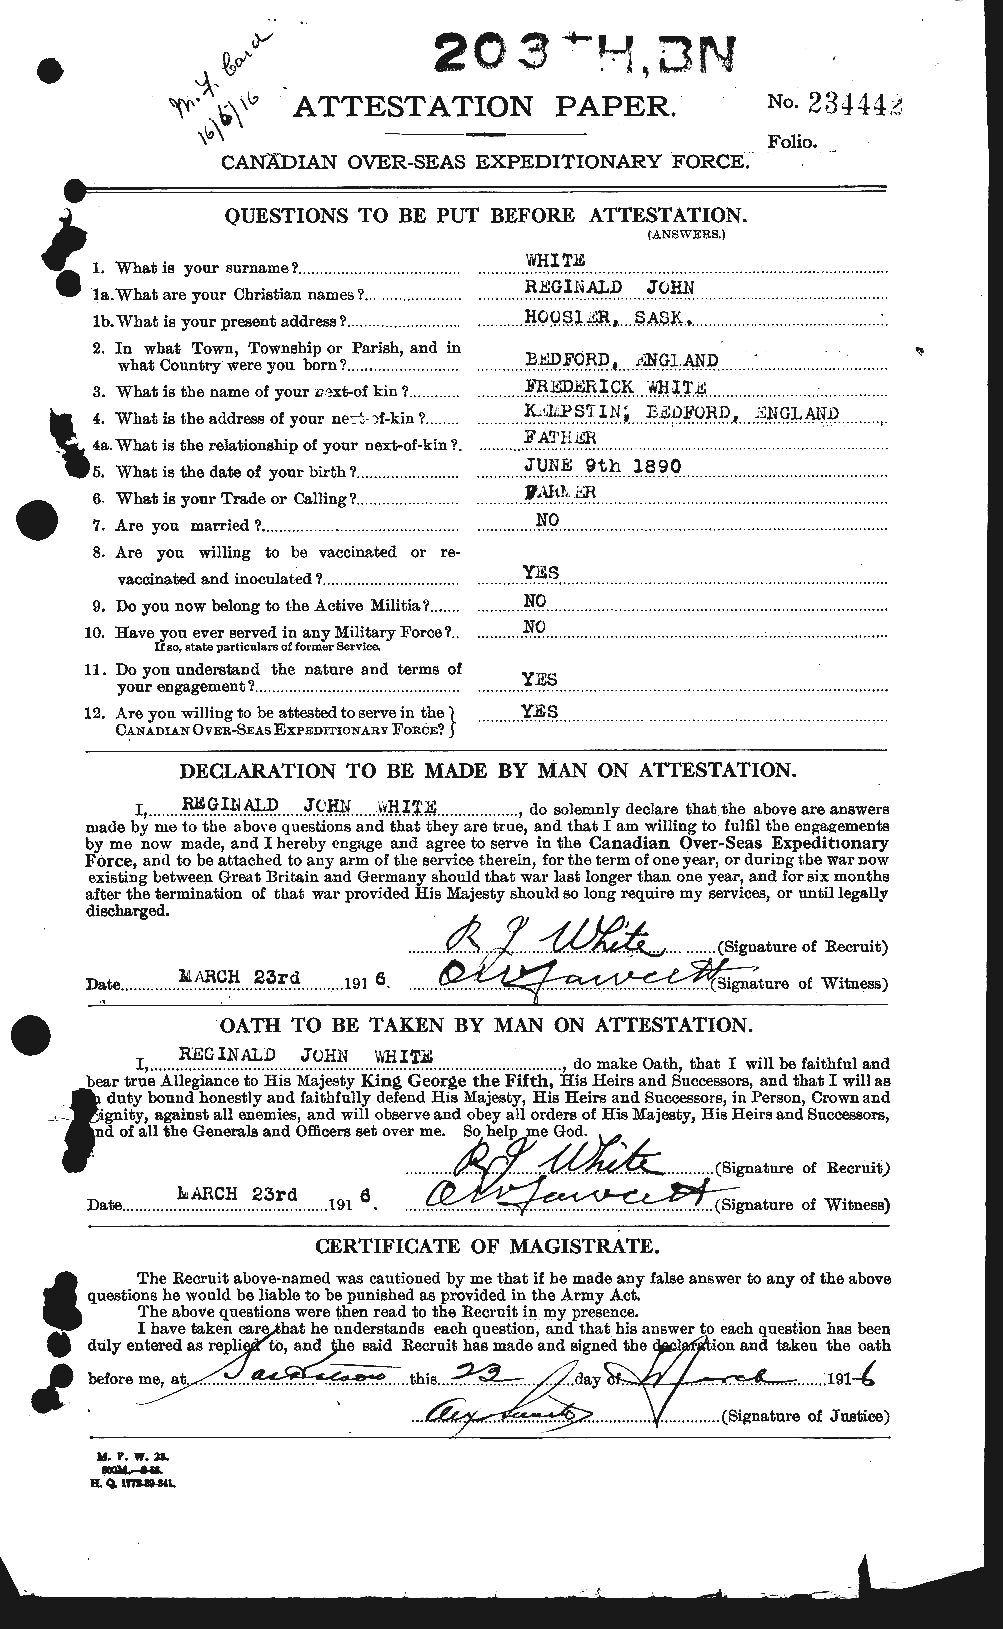 Personnel Records of the First World War - CEF 673443a